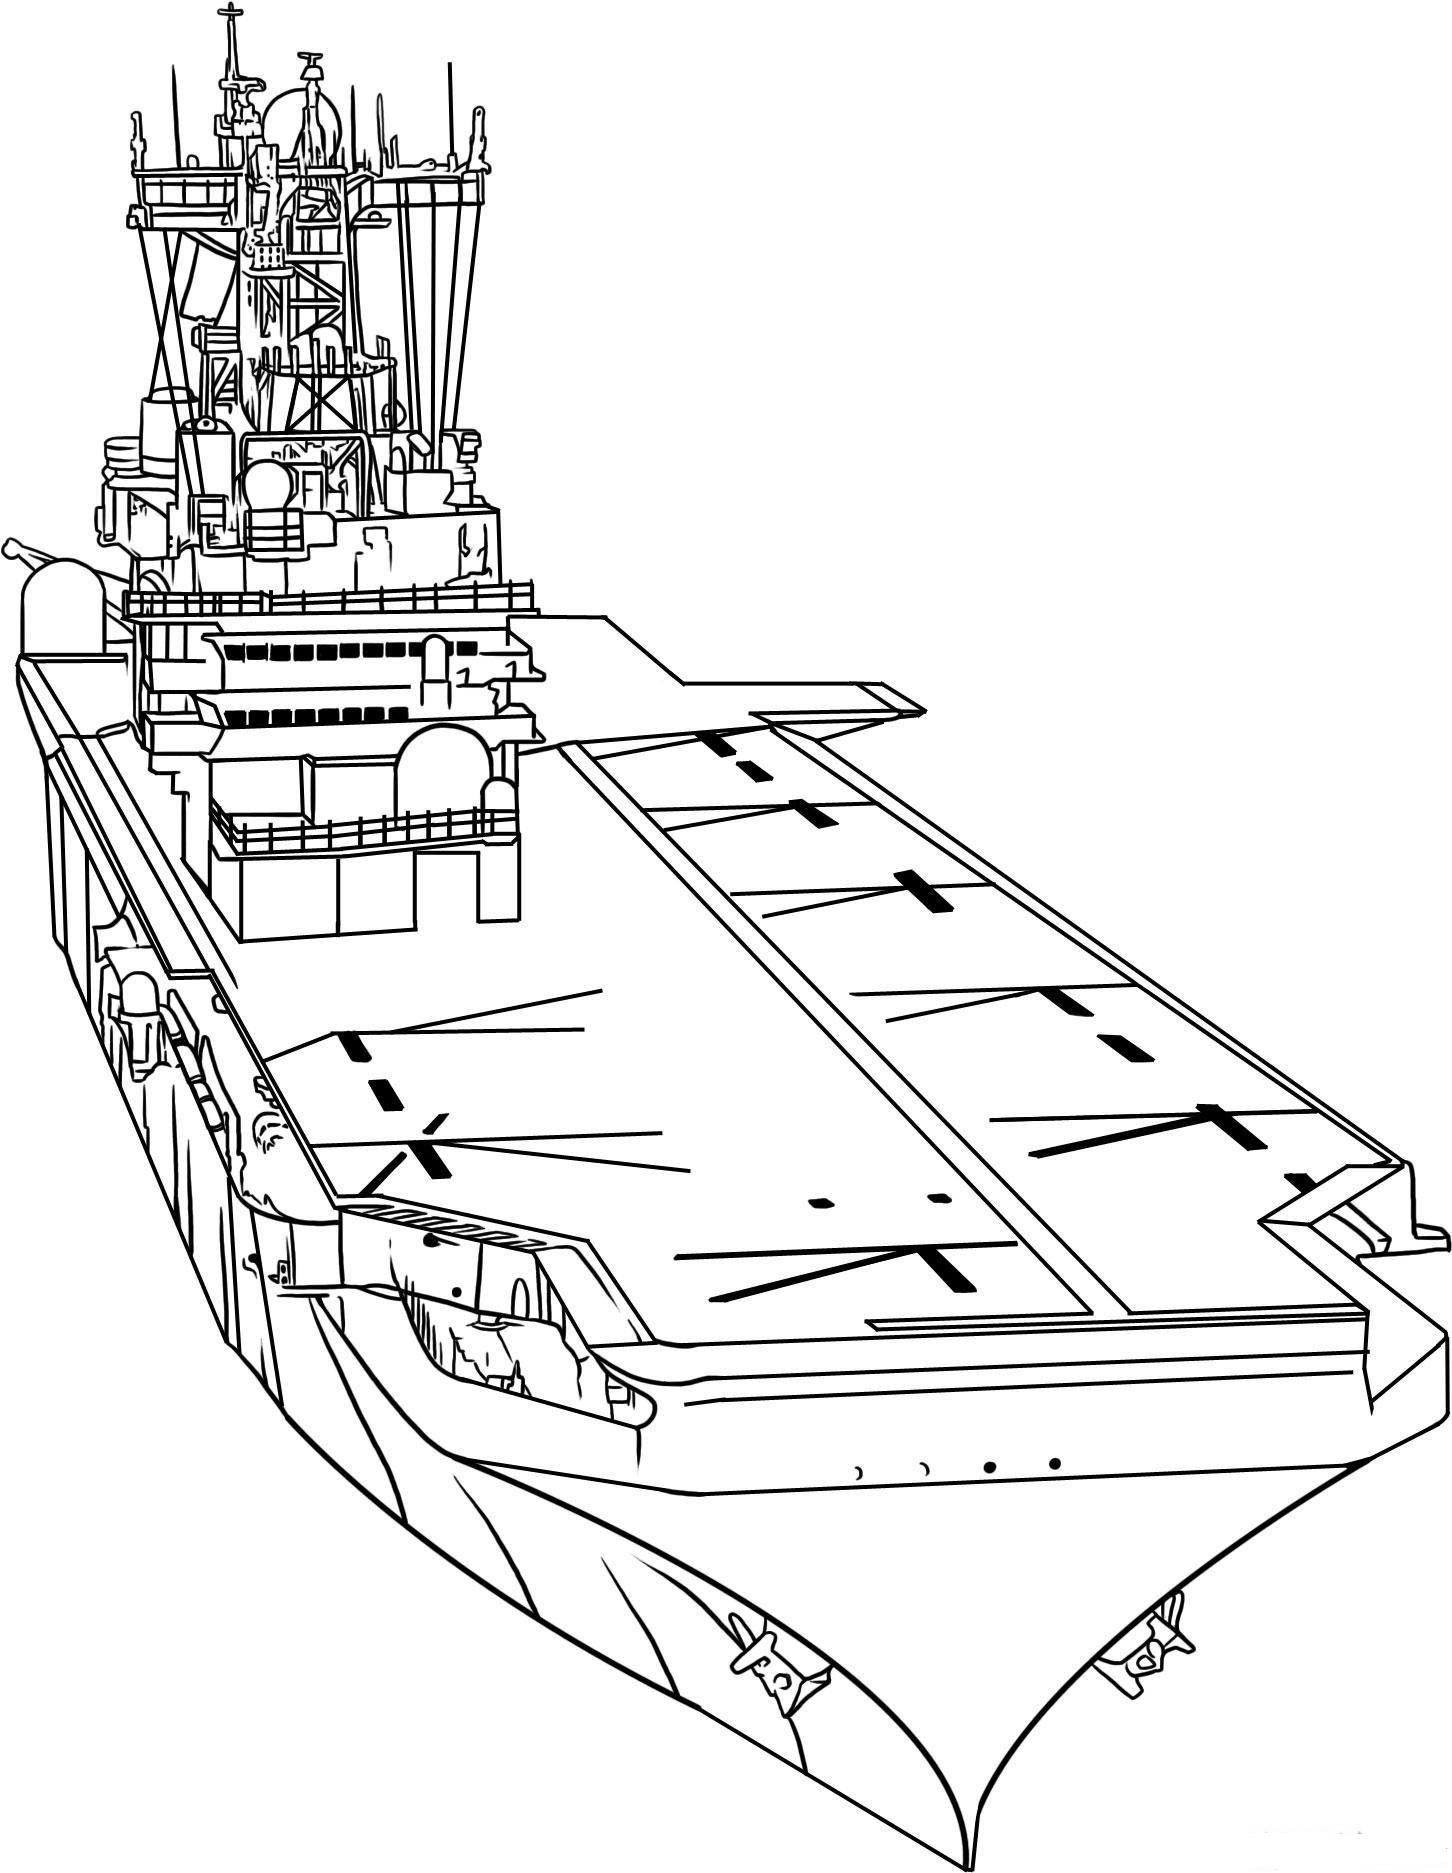 Awesome Aircraft Carriers Coloring Page - Free Printable Coloring Pages